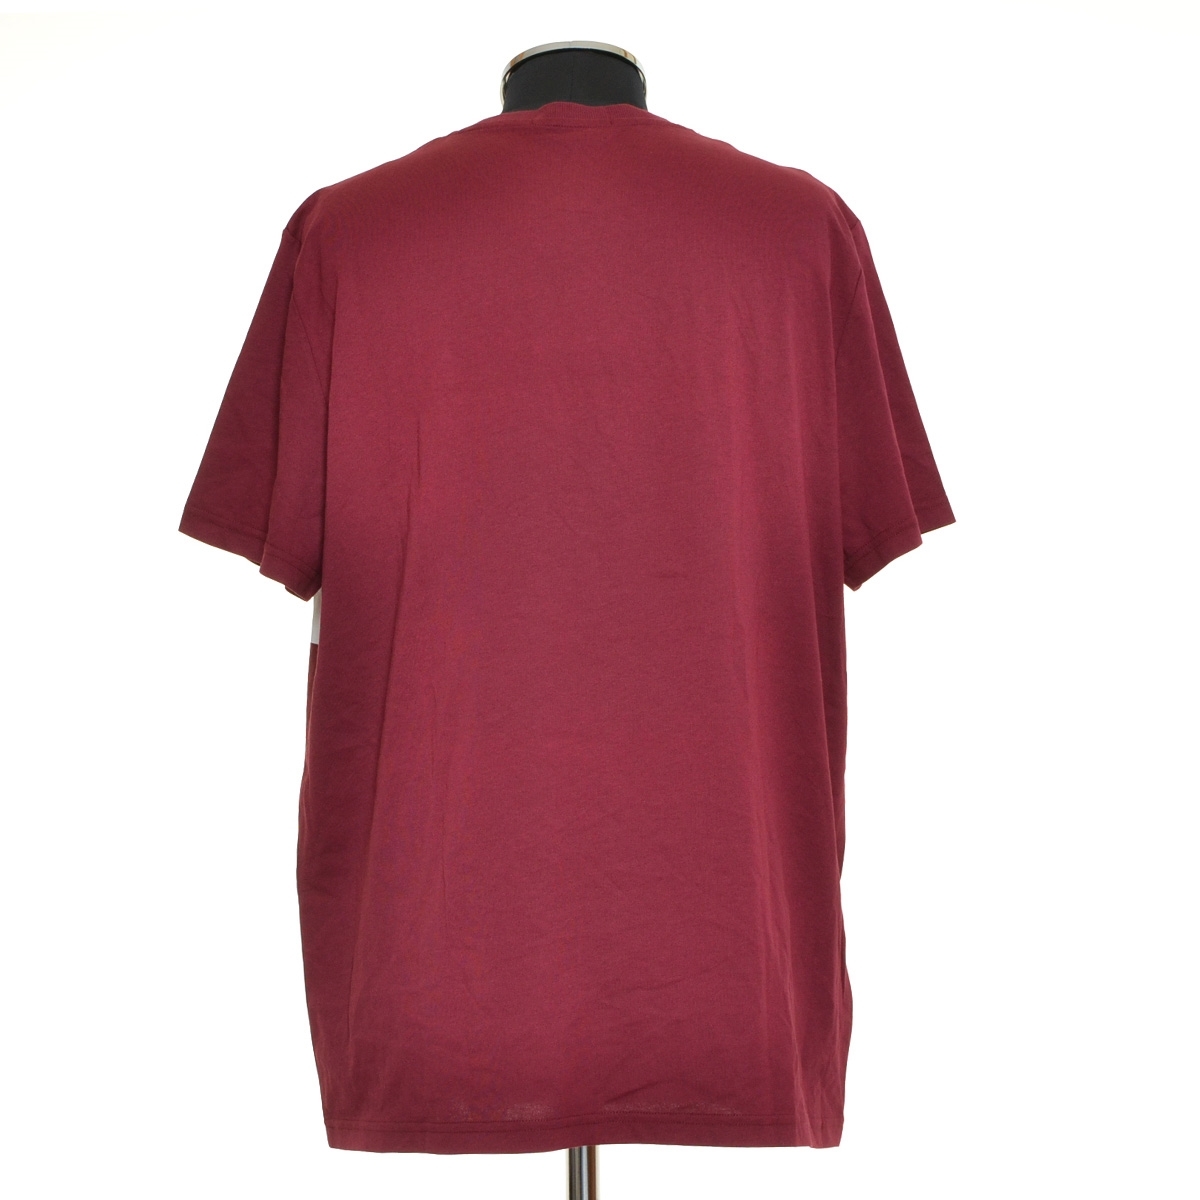 *485673 unused goods FRED PERRY Fred Perry * T-shirt short sleeves BOLD GRAPHIC T-SHIRT M8521 size L( domestic XL corresponding ) men's bordeaux 